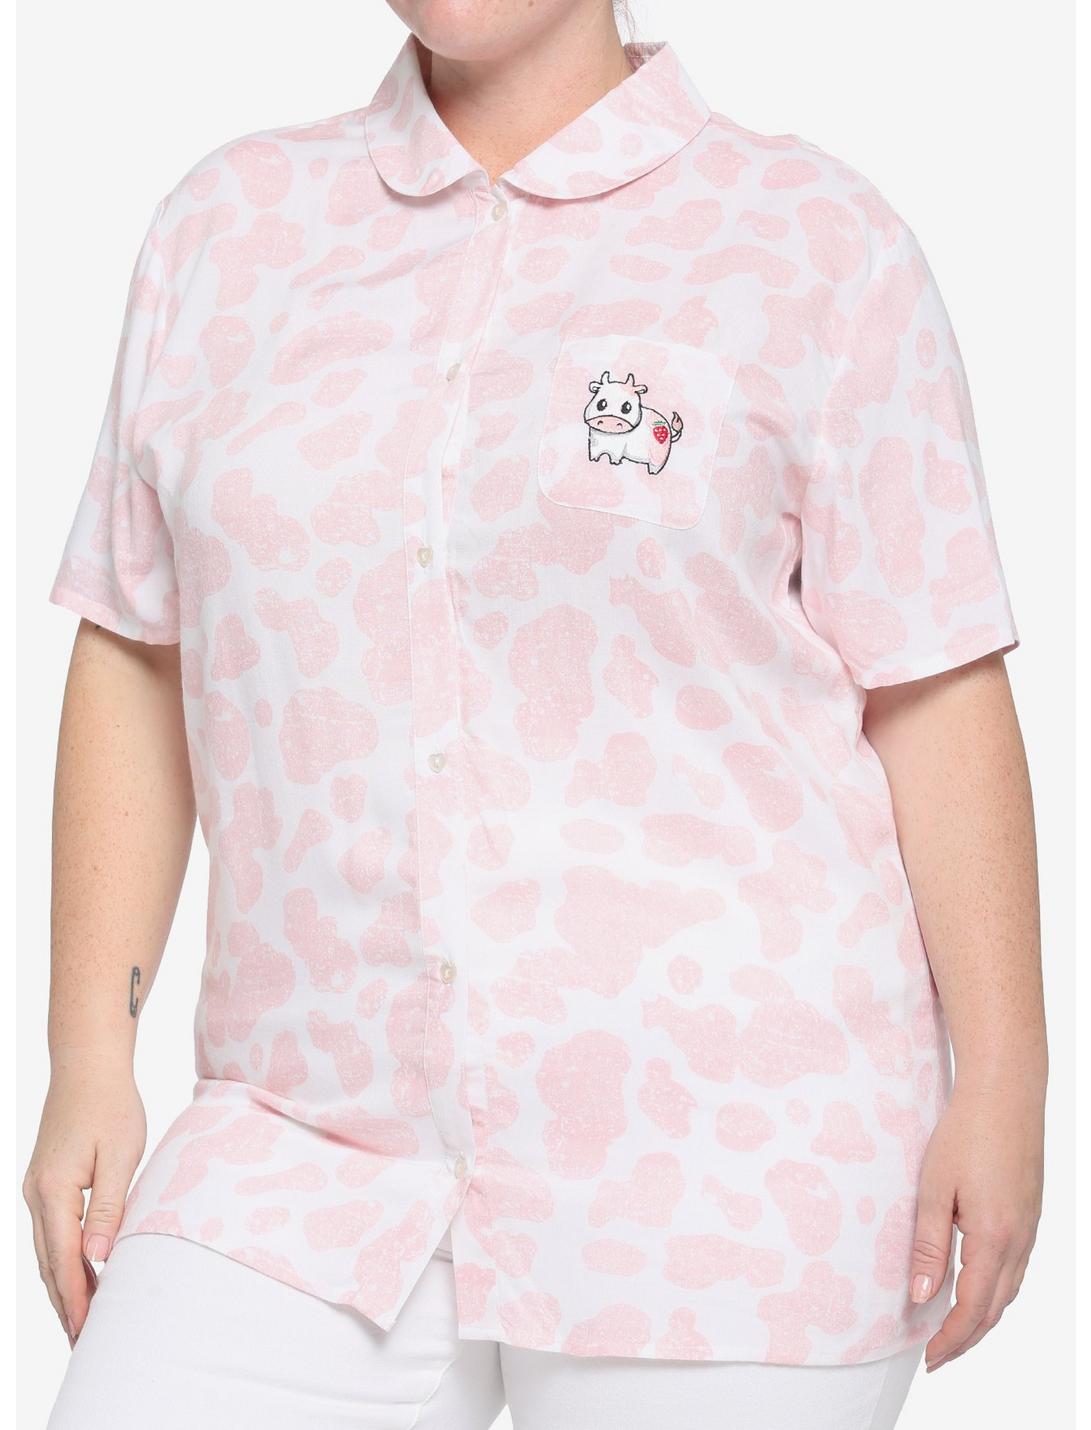 Strawberry Cow Girls Woven Button-Up Plus Size, PINK, hi-res